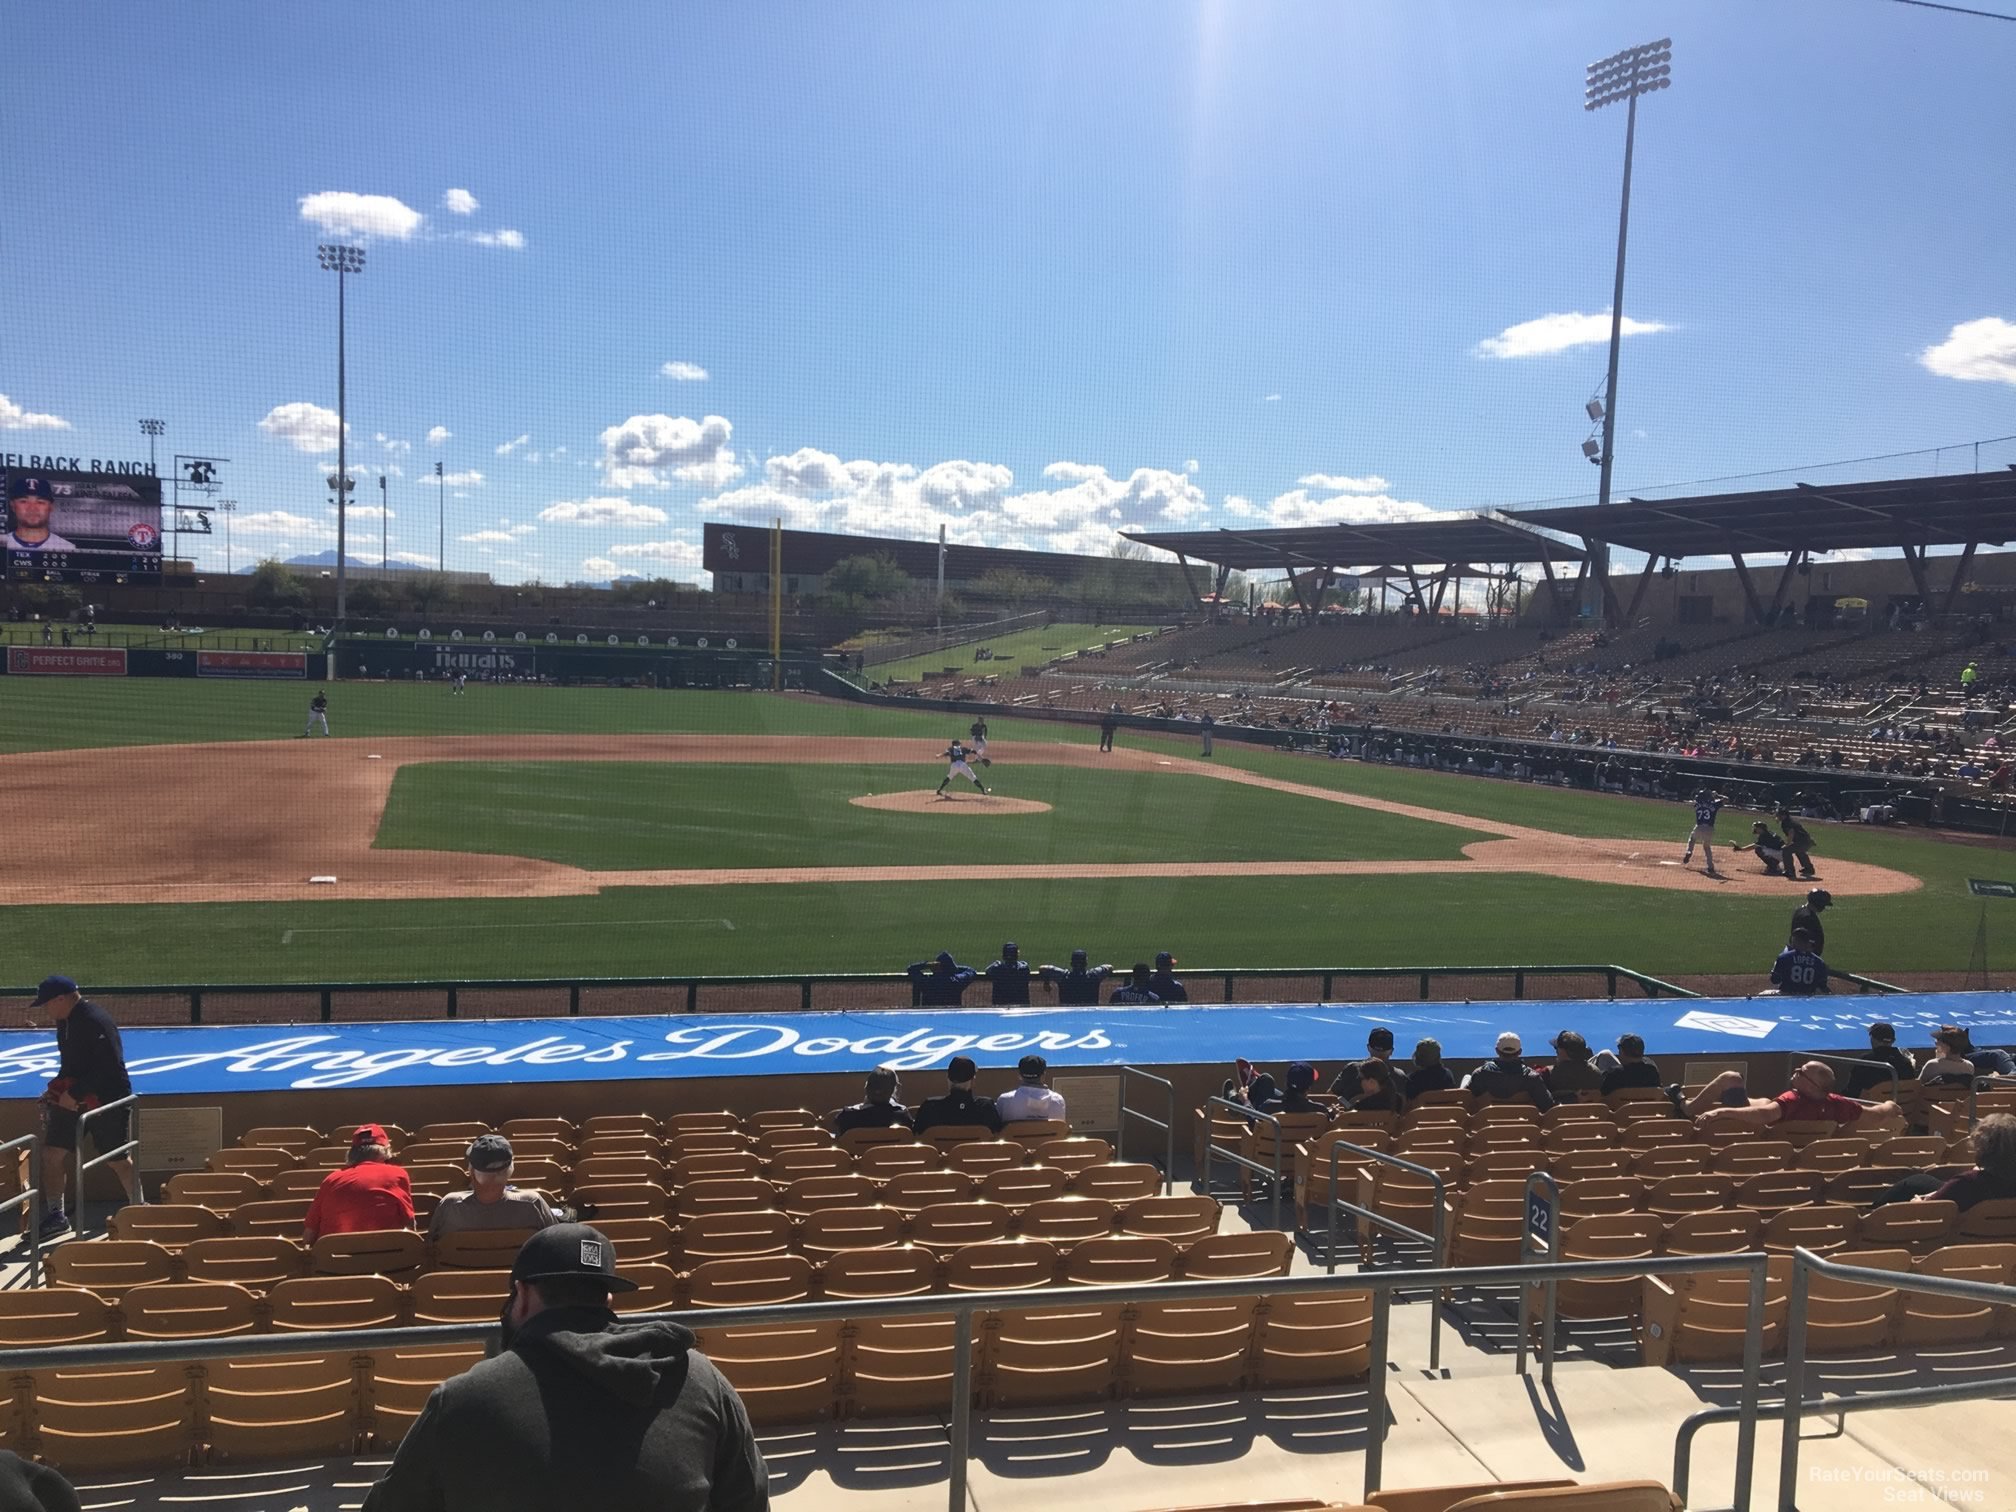 section 122, row 5 seat view  - camelback ranch